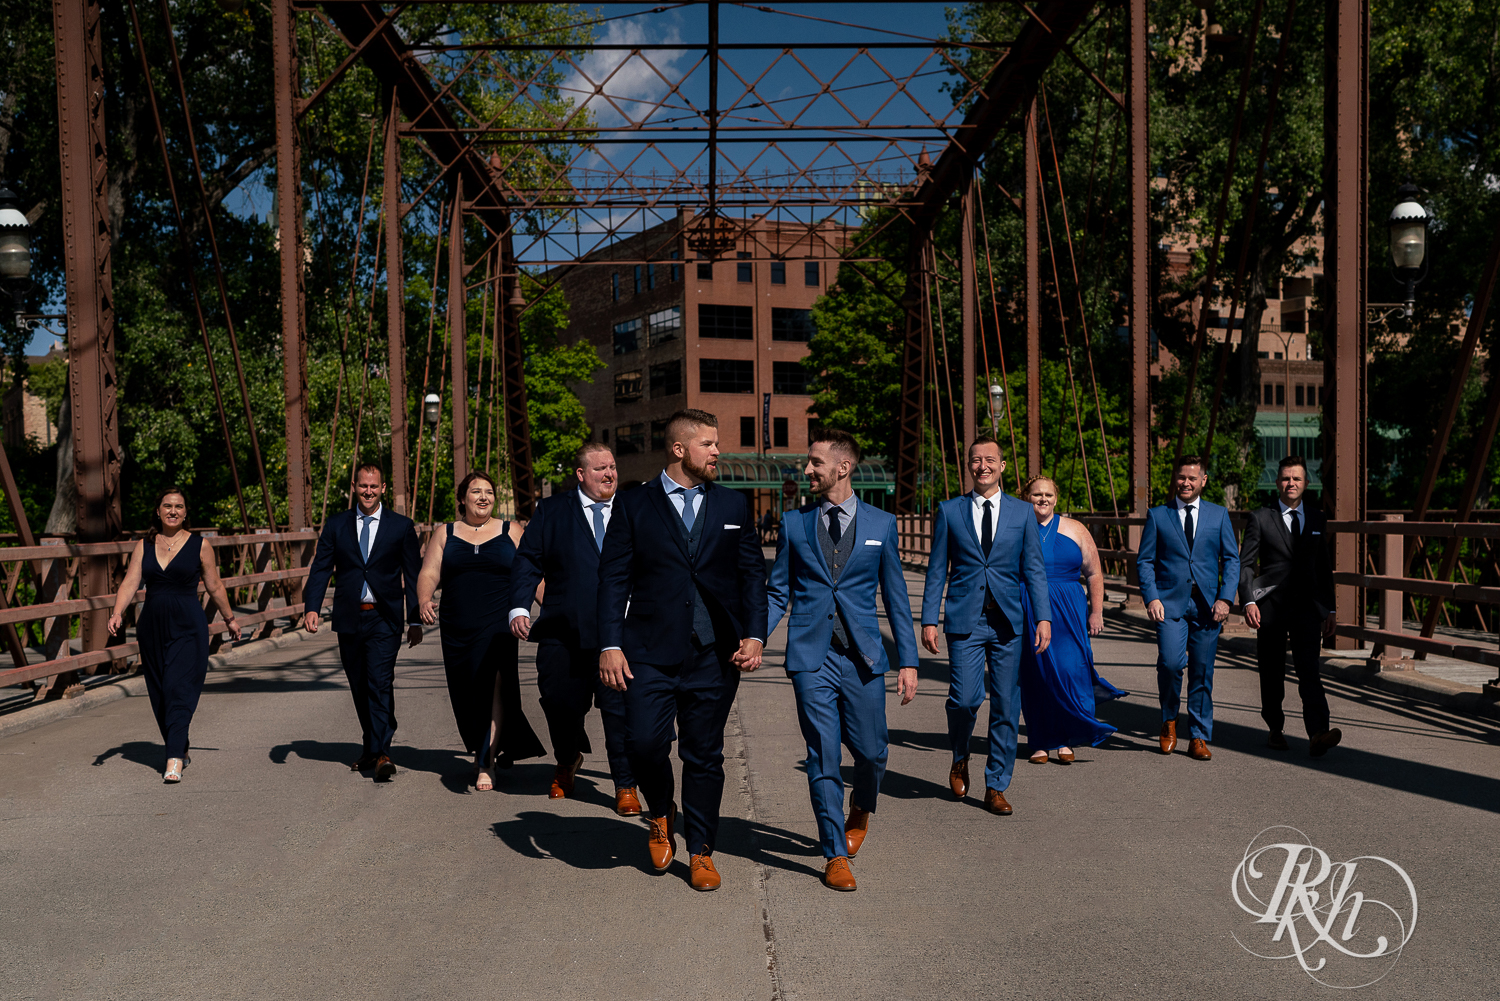 Gay wedding party dressed in blue suits and dresses walking on bridge in Nicollet Island in Minneapolis, Minnesota on a sunny day.